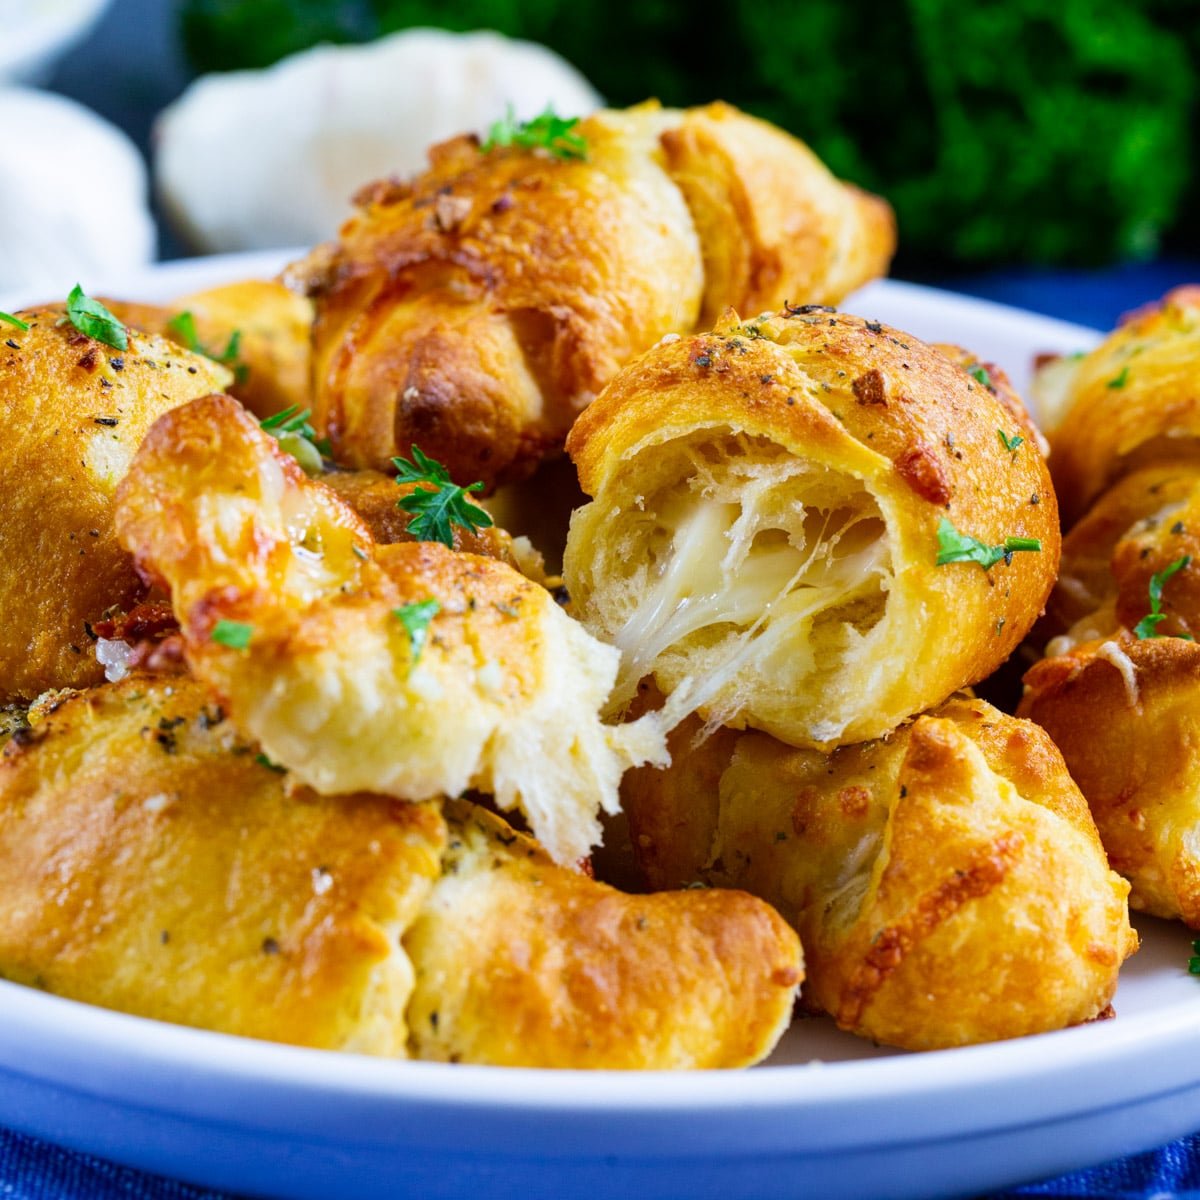 Air Fryer Cheesy Garlic Skillet Rolls with one roll cut open to show inside.